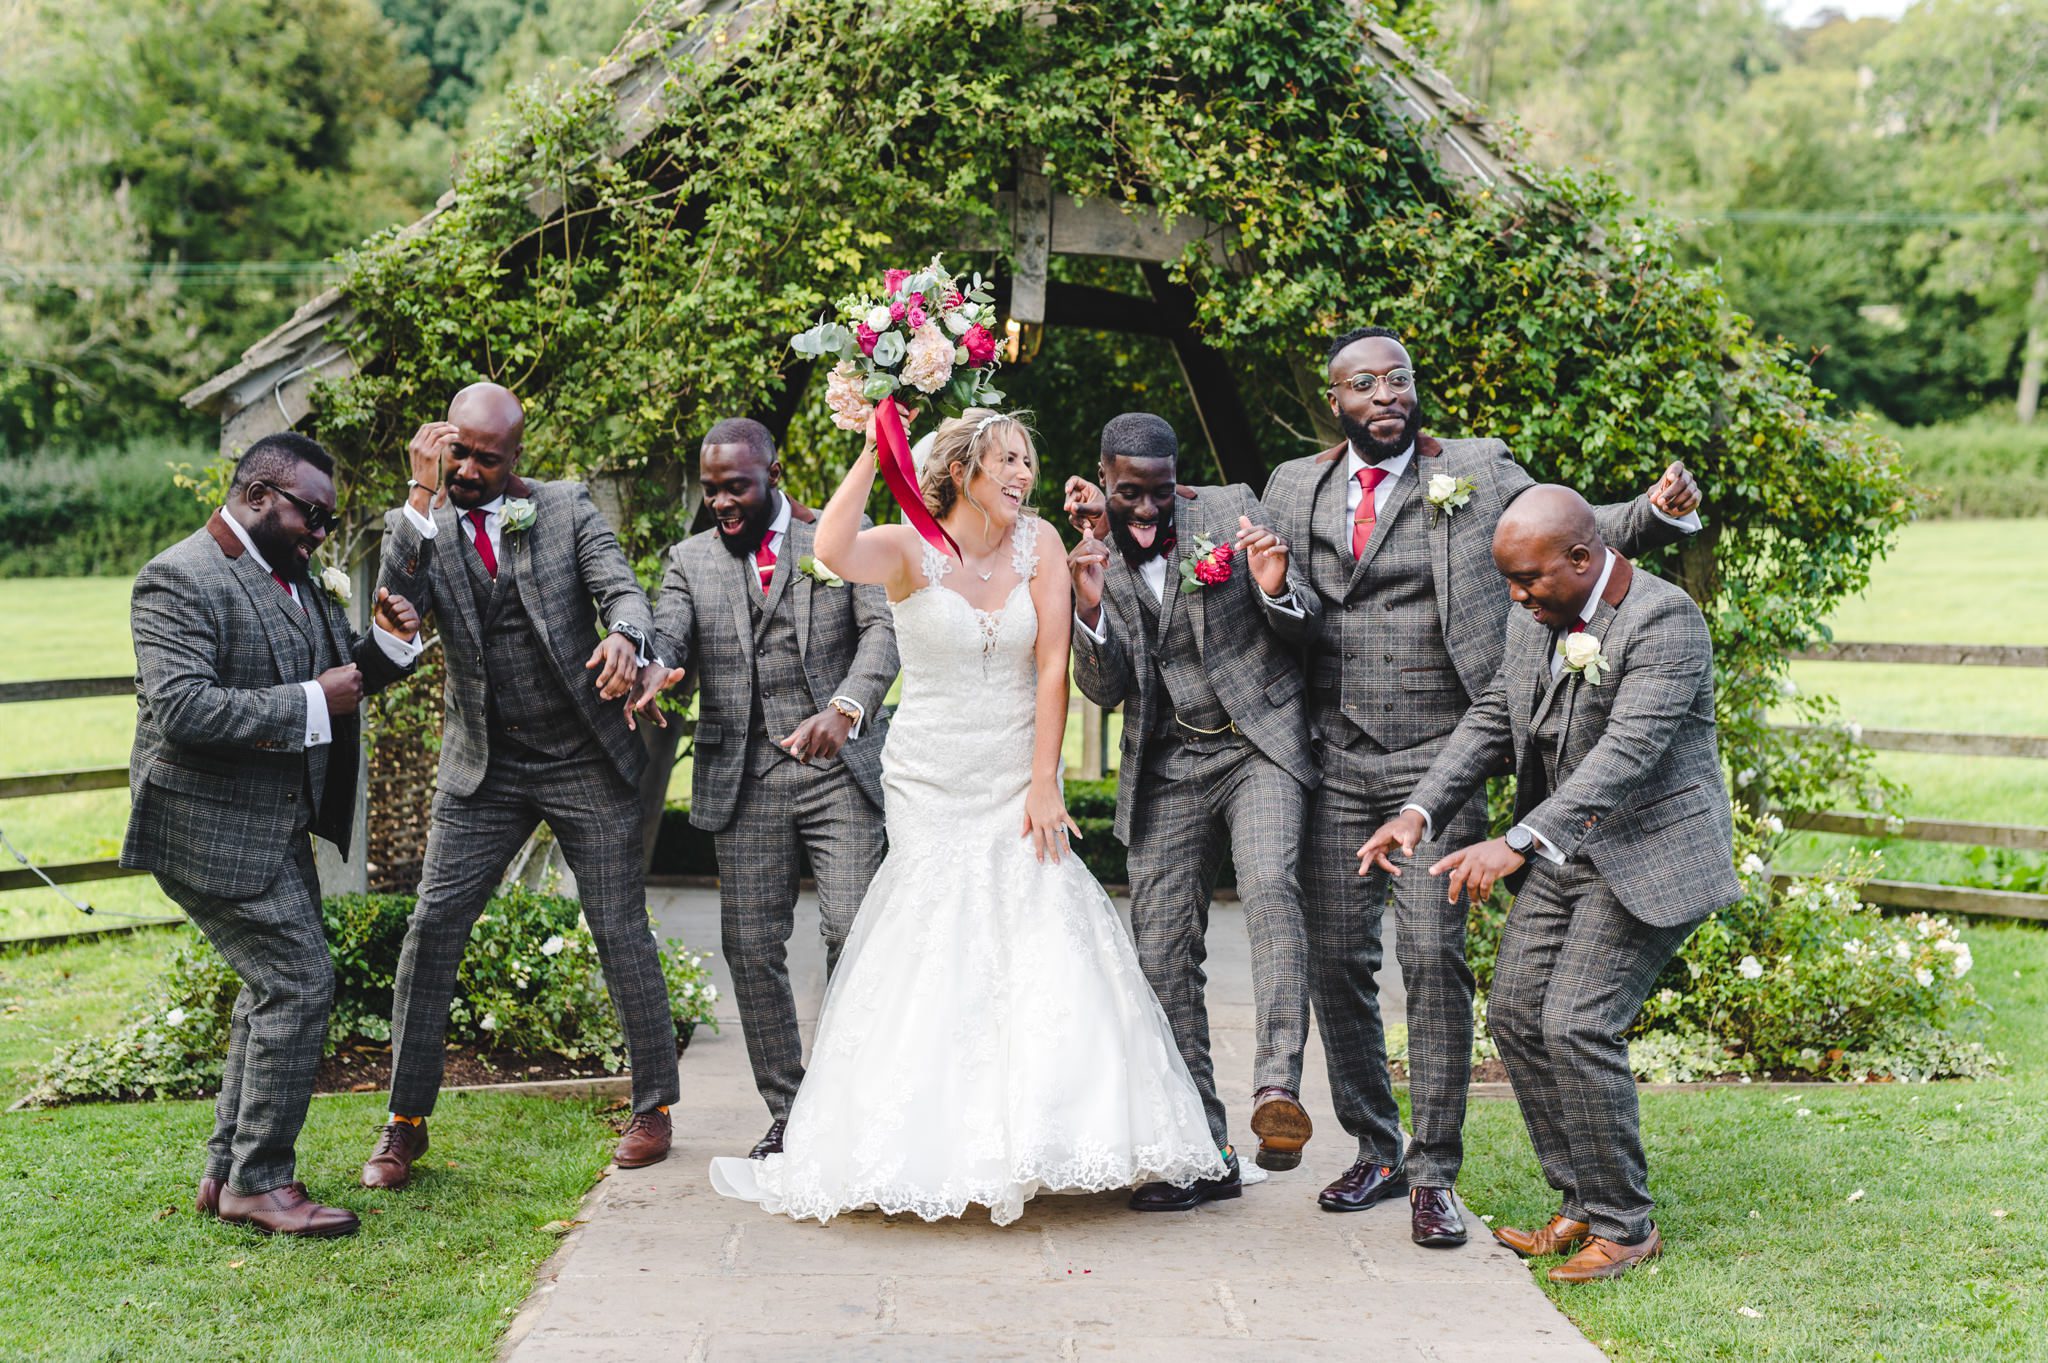 Bride and groomsmen dancing during group pictures